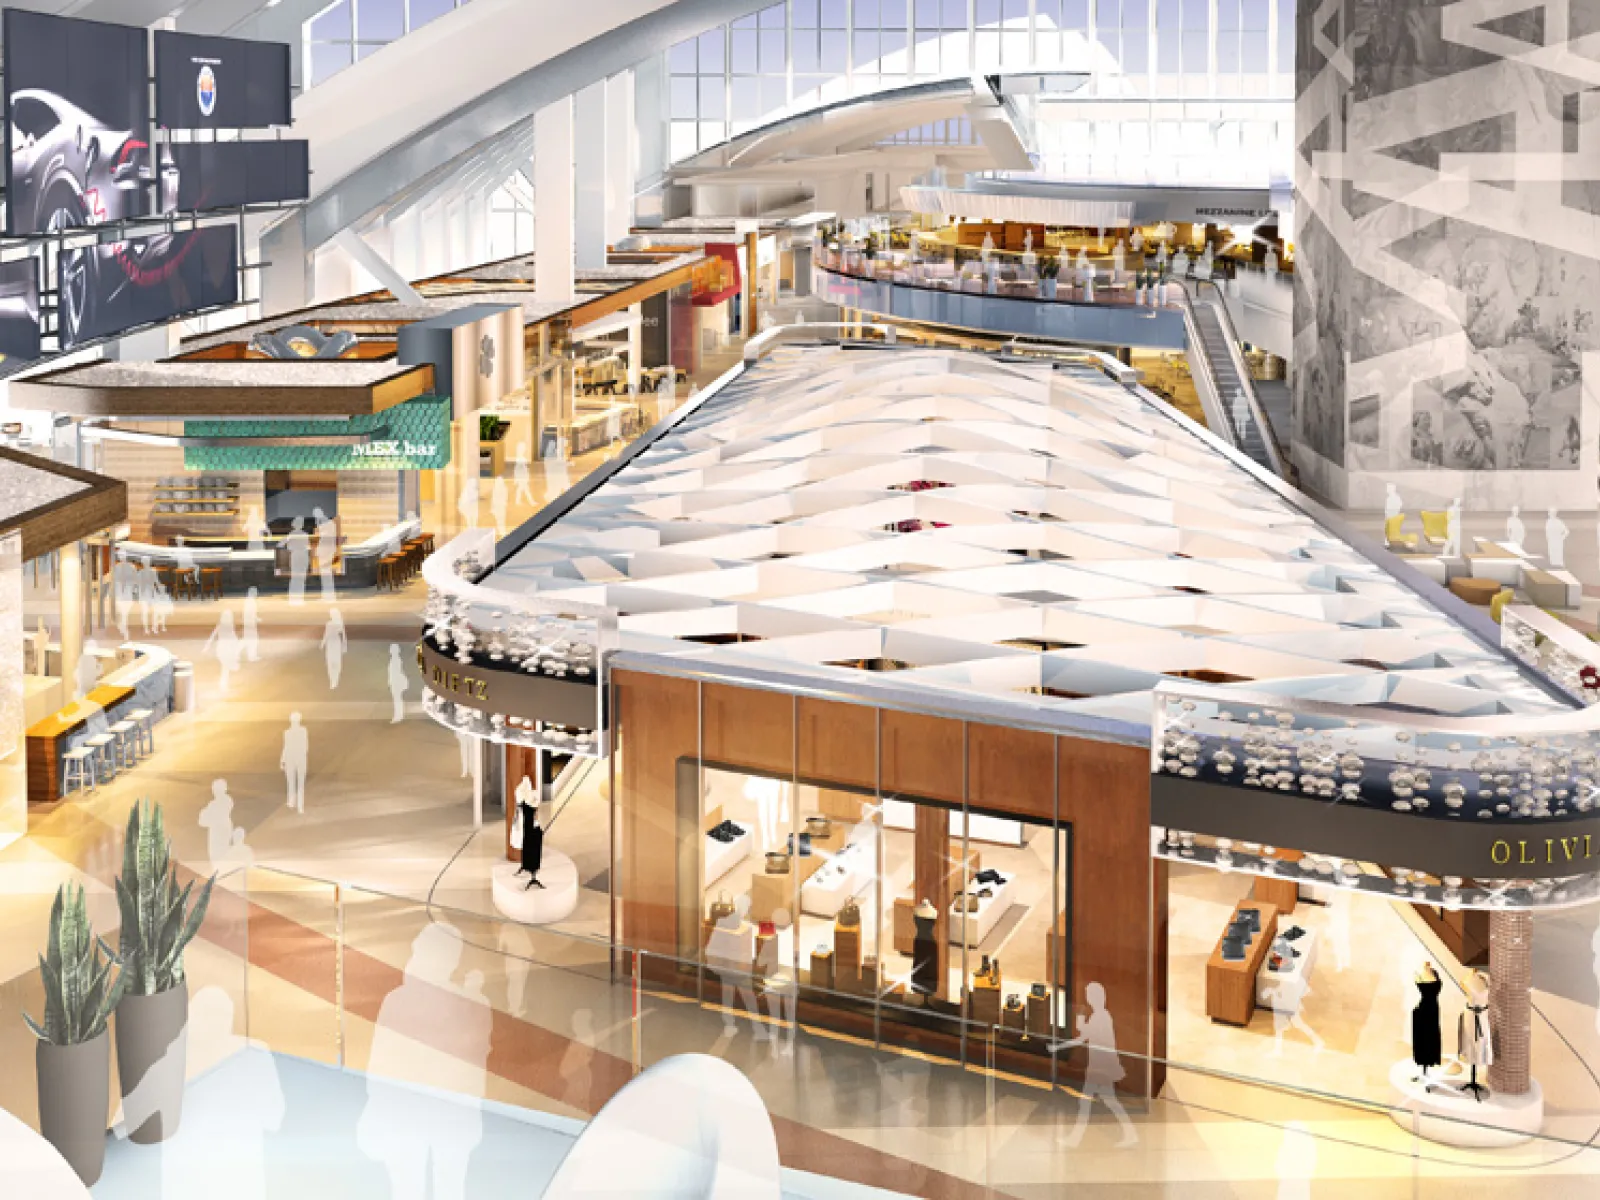 LAX Dining & Retail Redesign Earns National Recognition